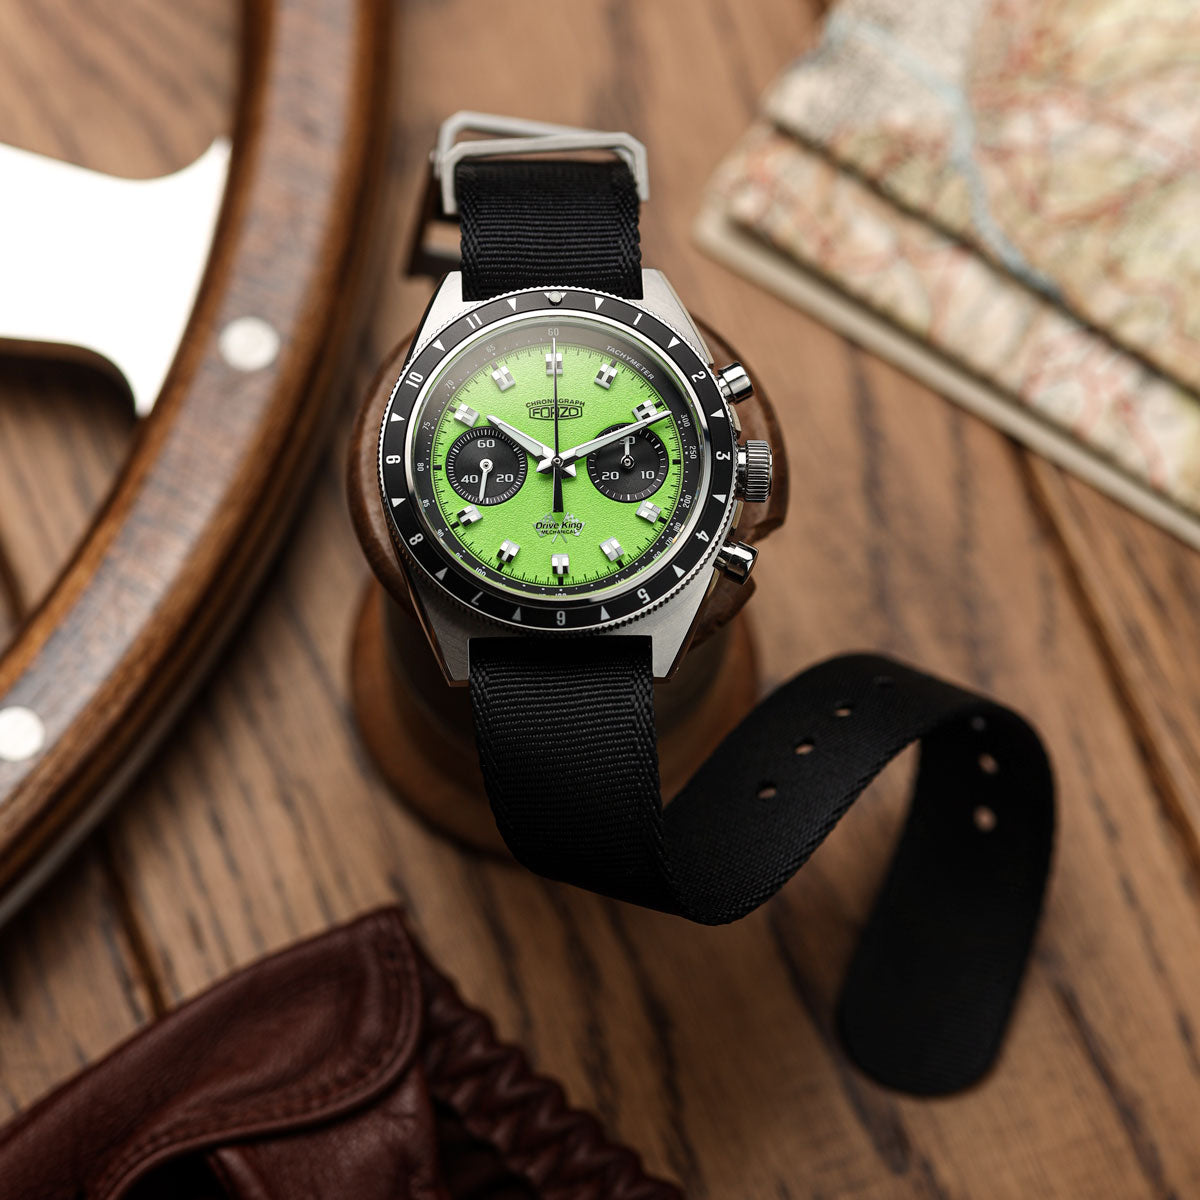 Racing SP Nylon Watch Strap - Green with Racing Stripes - additional image 1